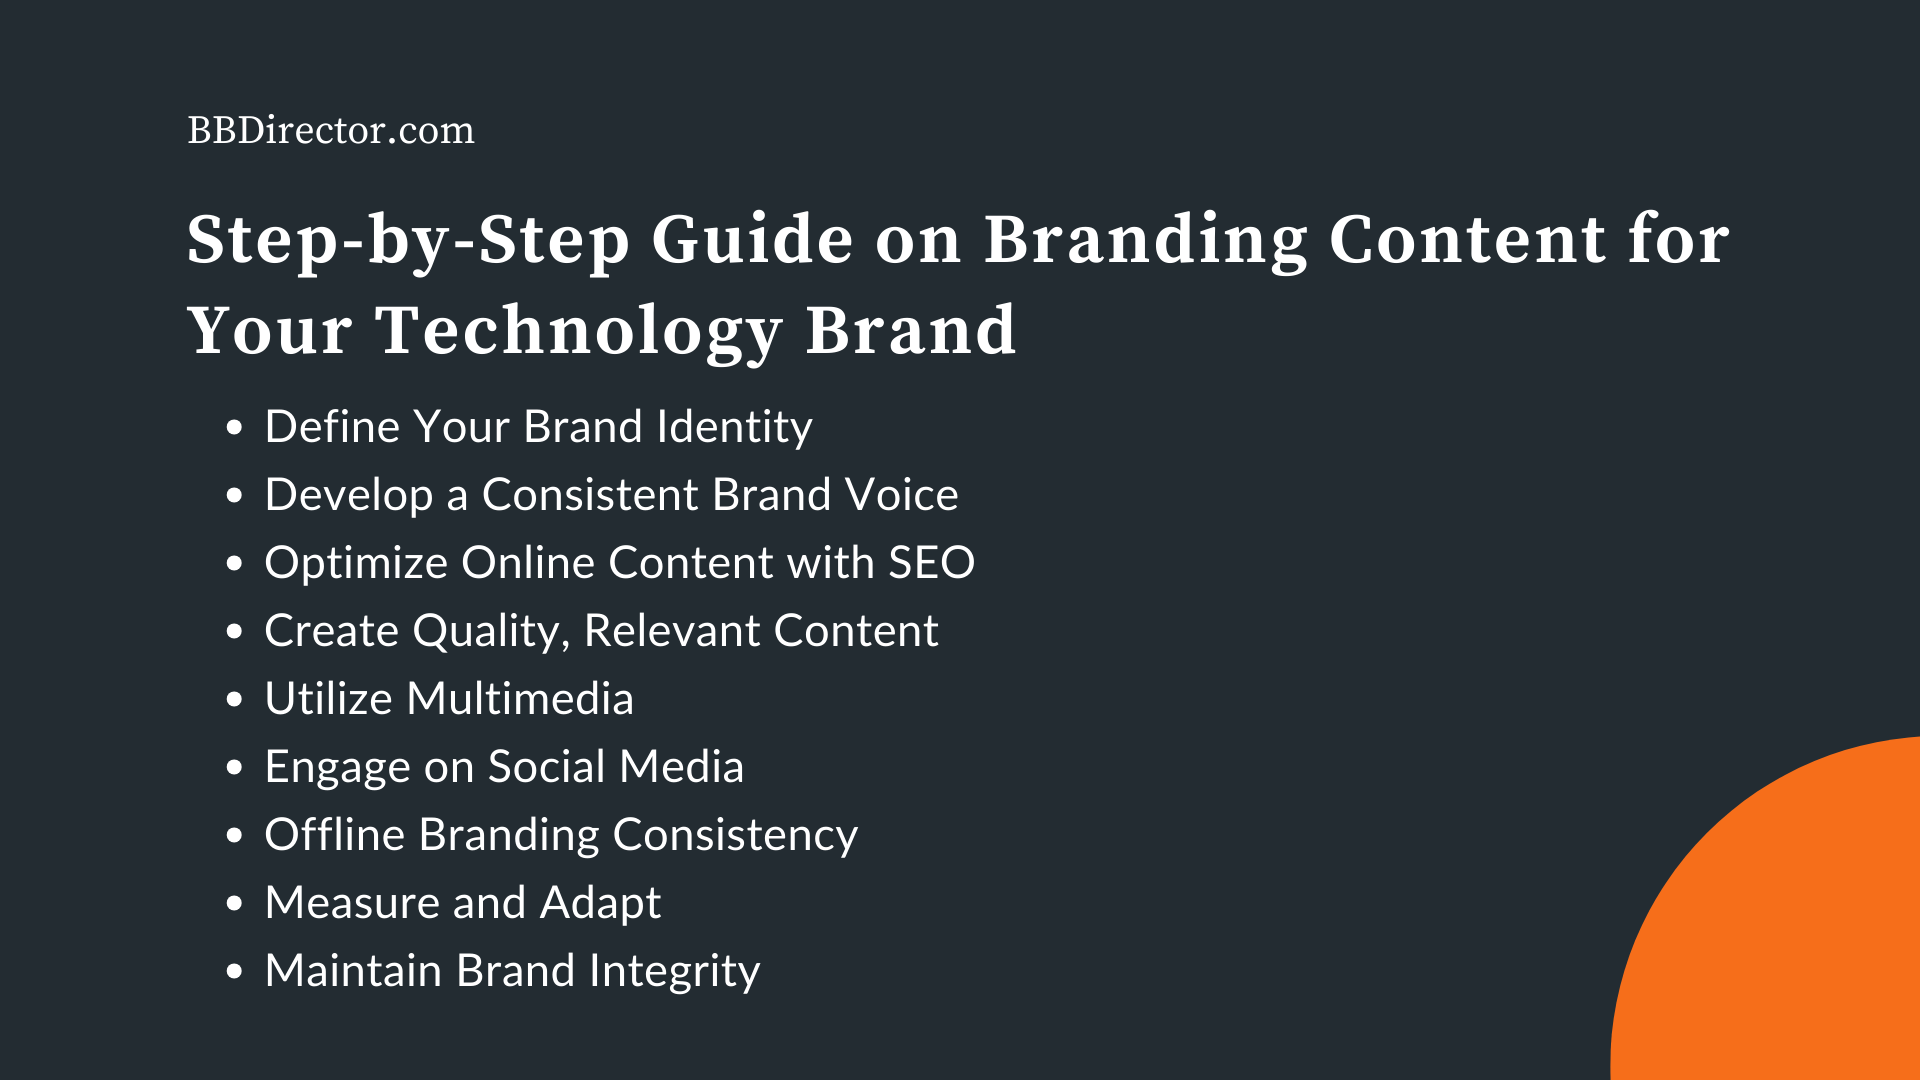 Guide on Branding Content for Your Technology Brand